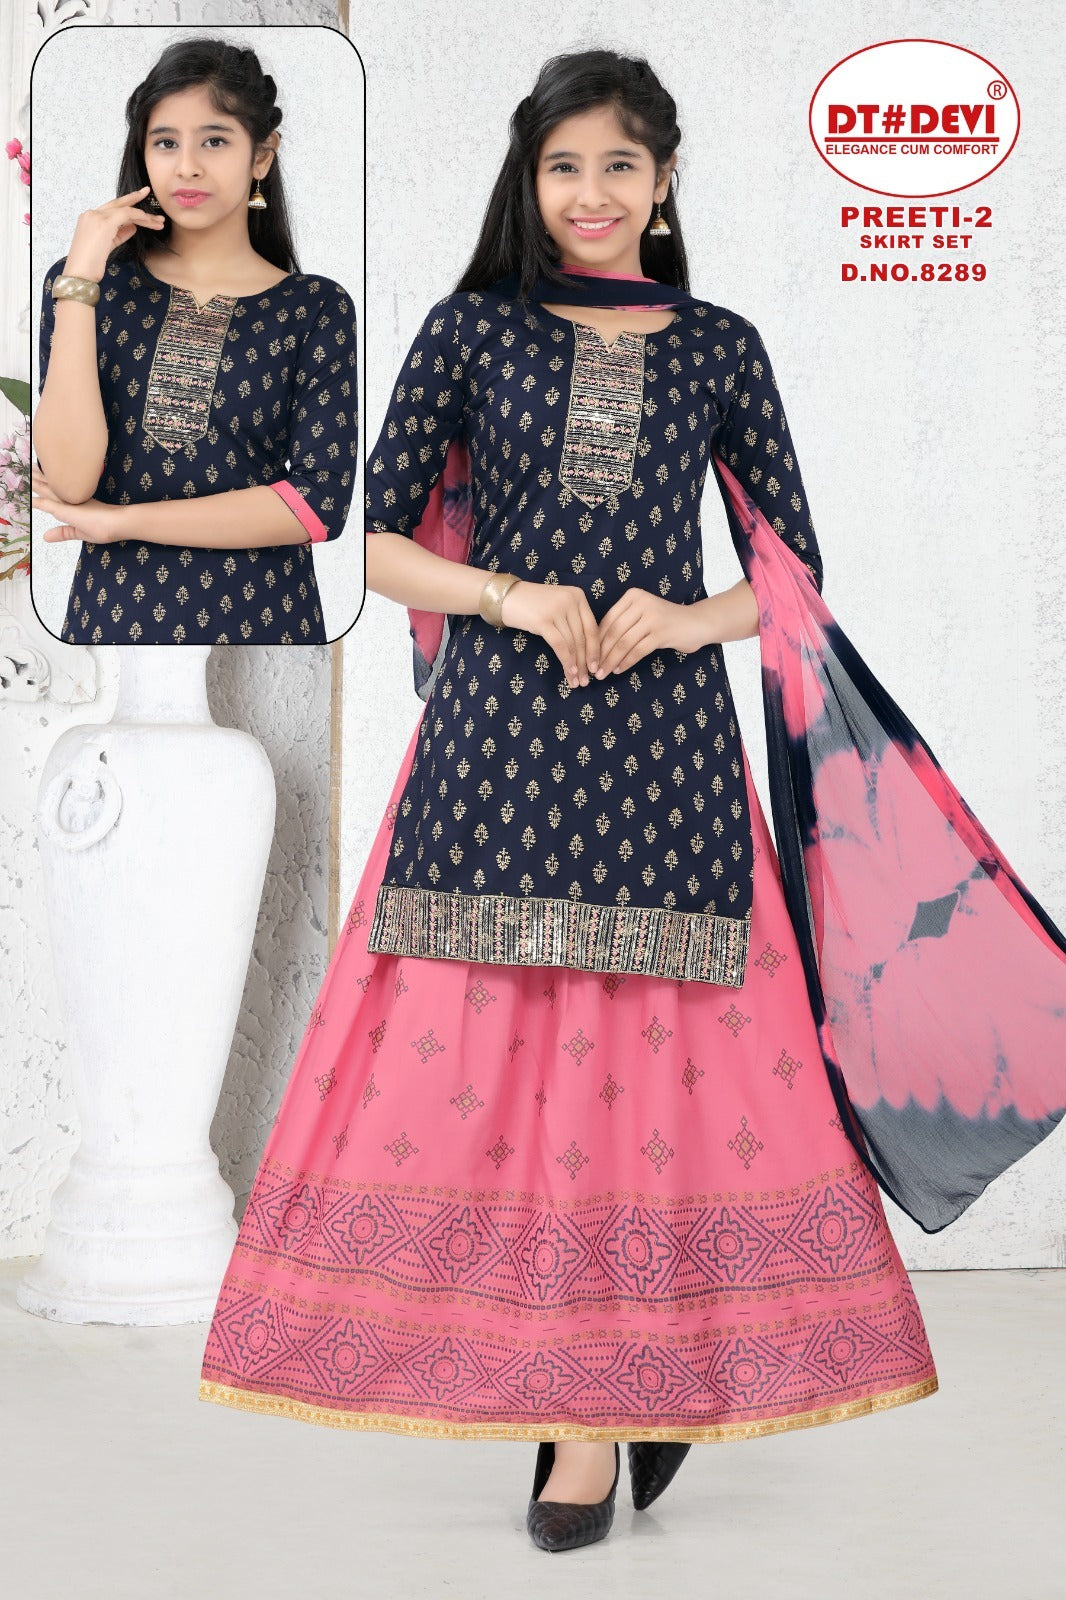 Preeti Vol 2-8289 Dt Devi Rayon Girls Readymade Skirt Style Suits